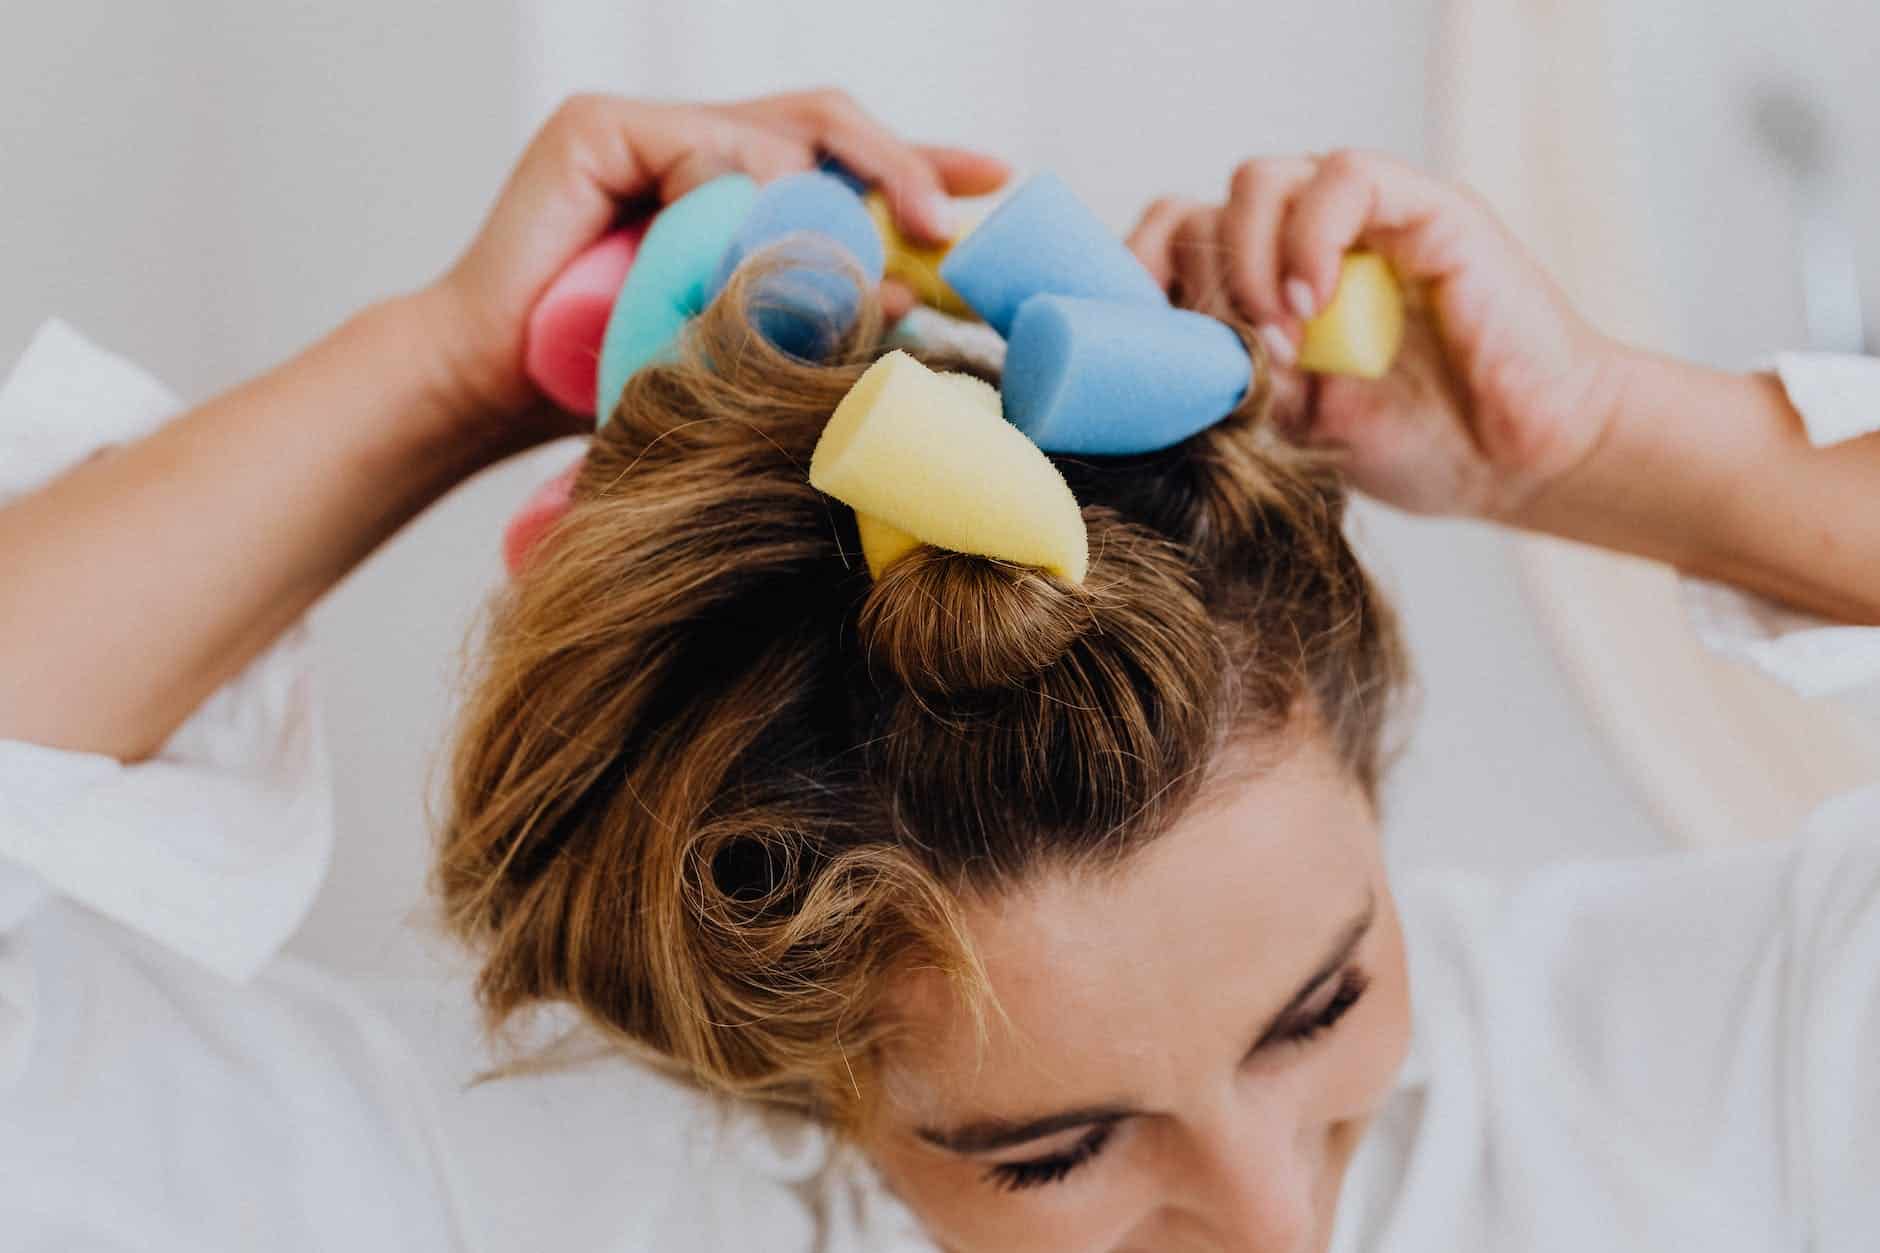 woman fixing her hair using hair rods curlers - hairstyling tips